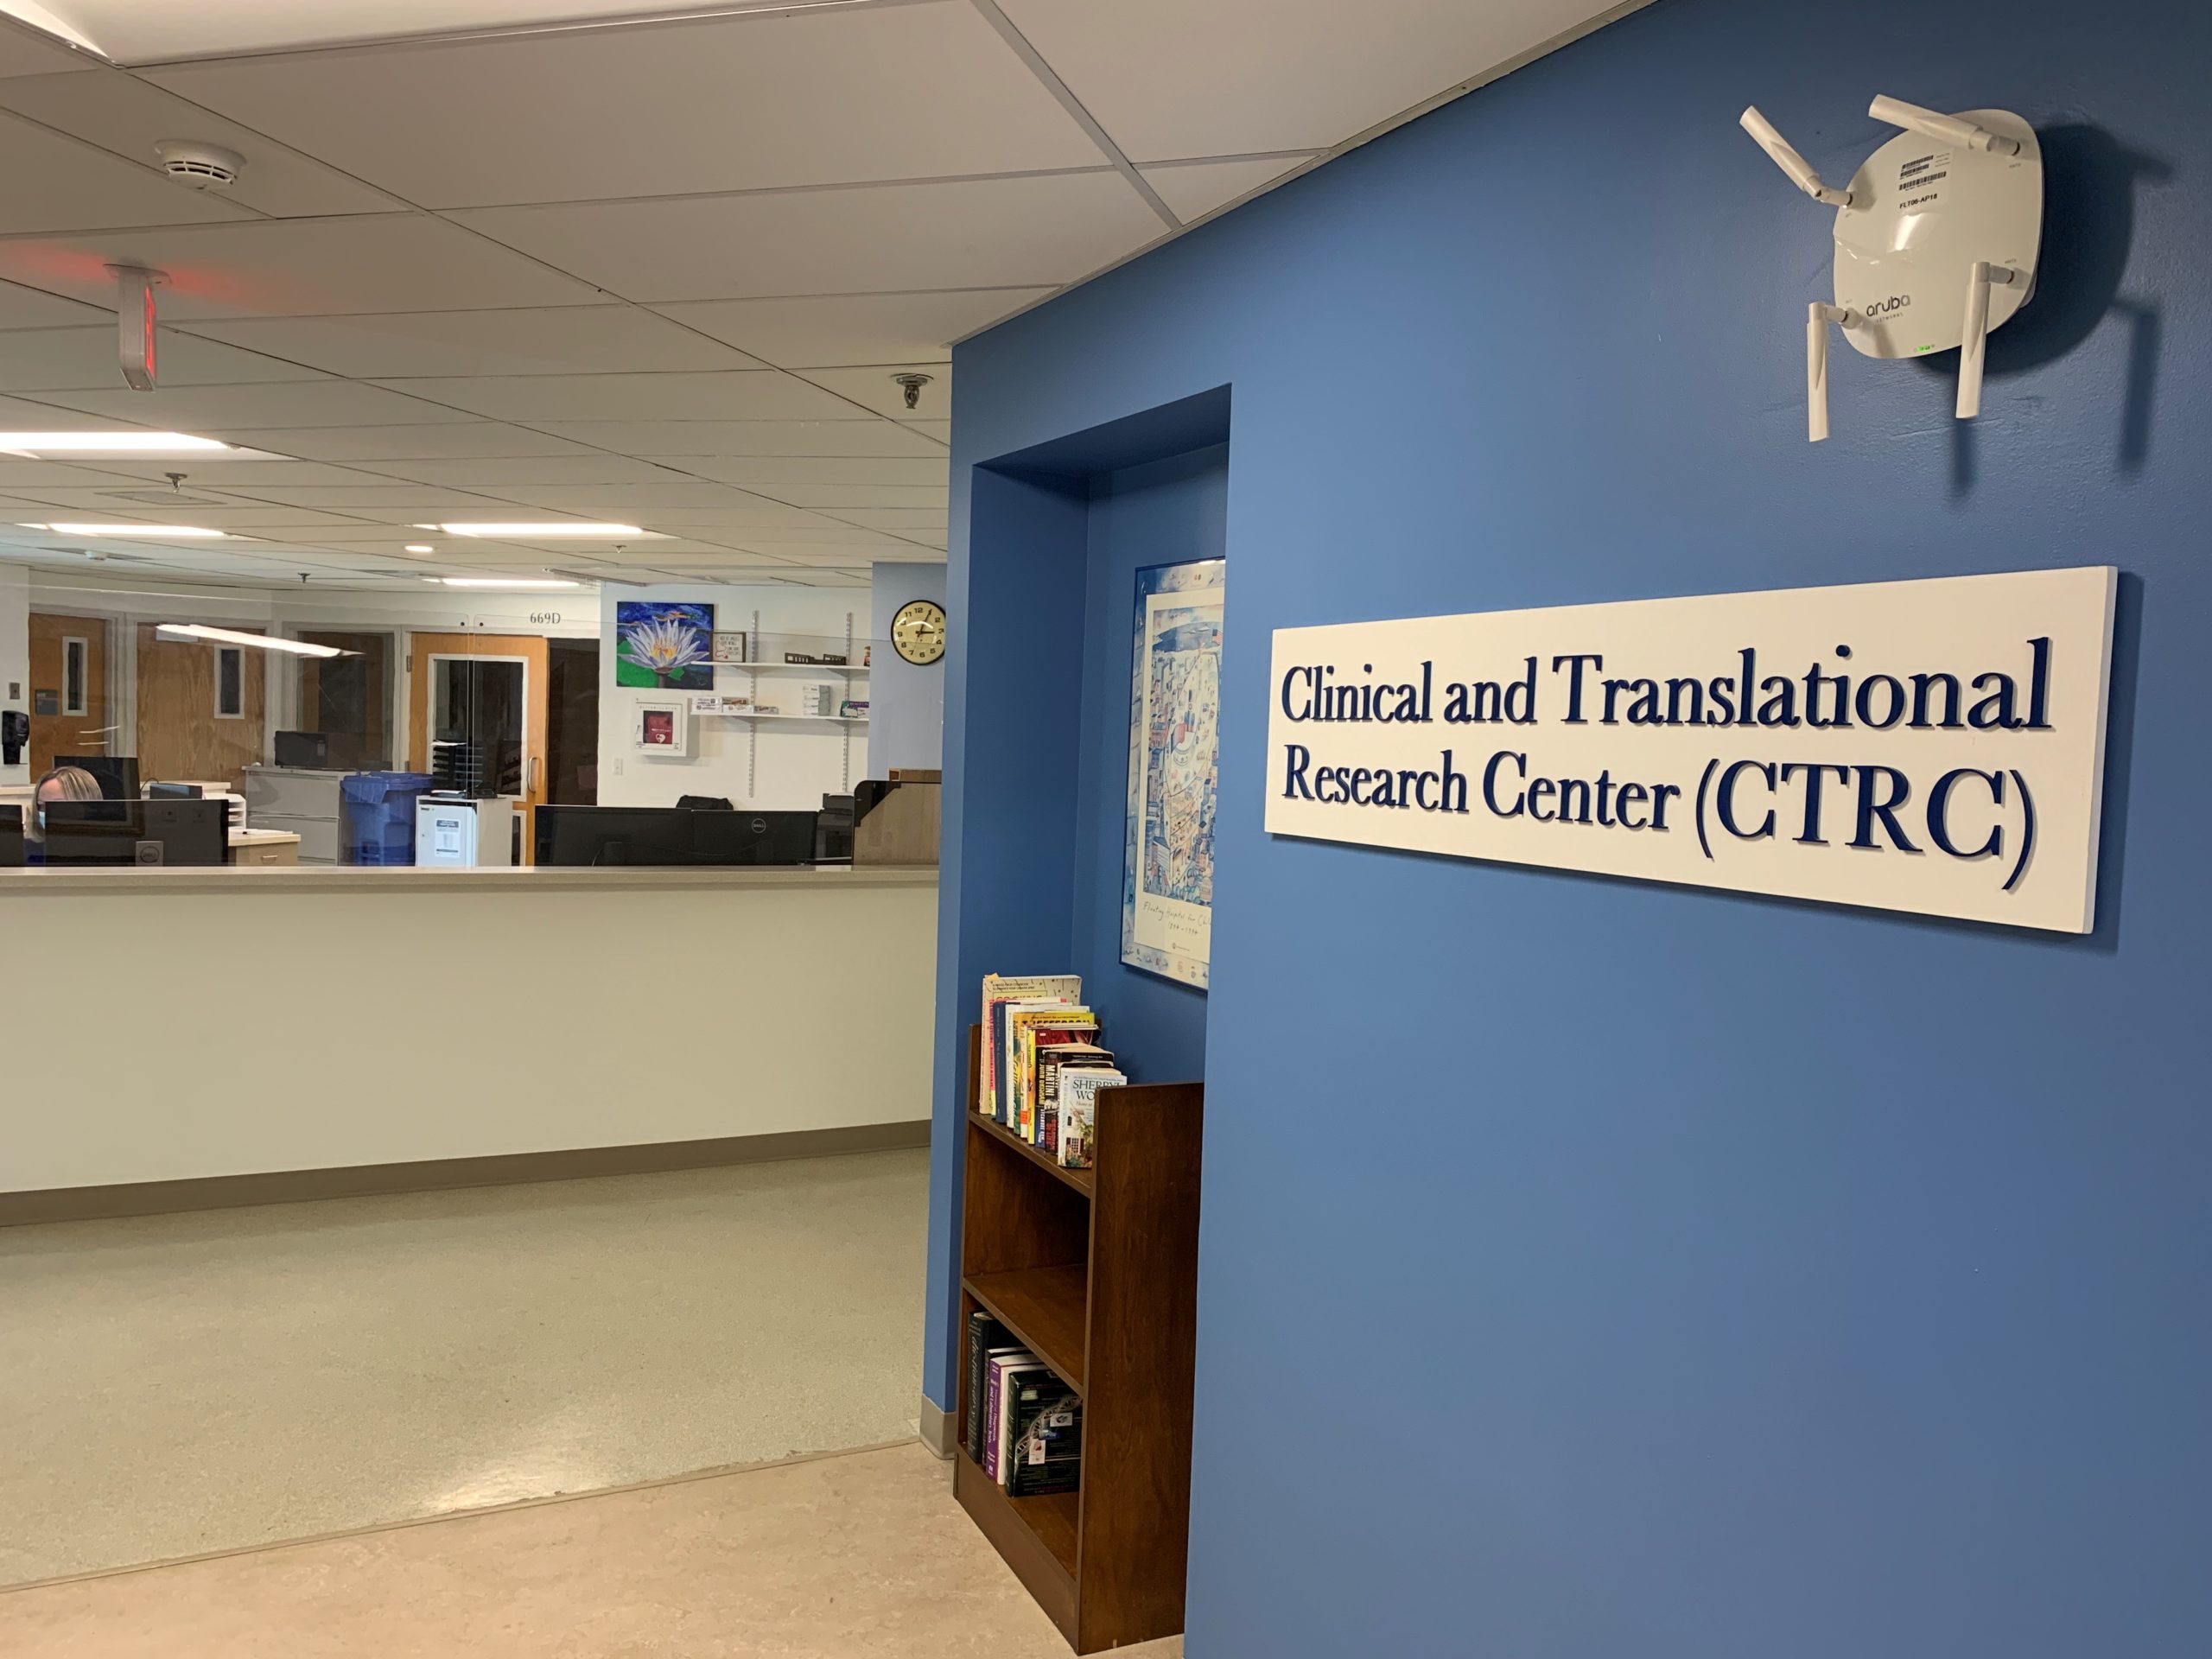 Photo shows the CTRC sign and desk